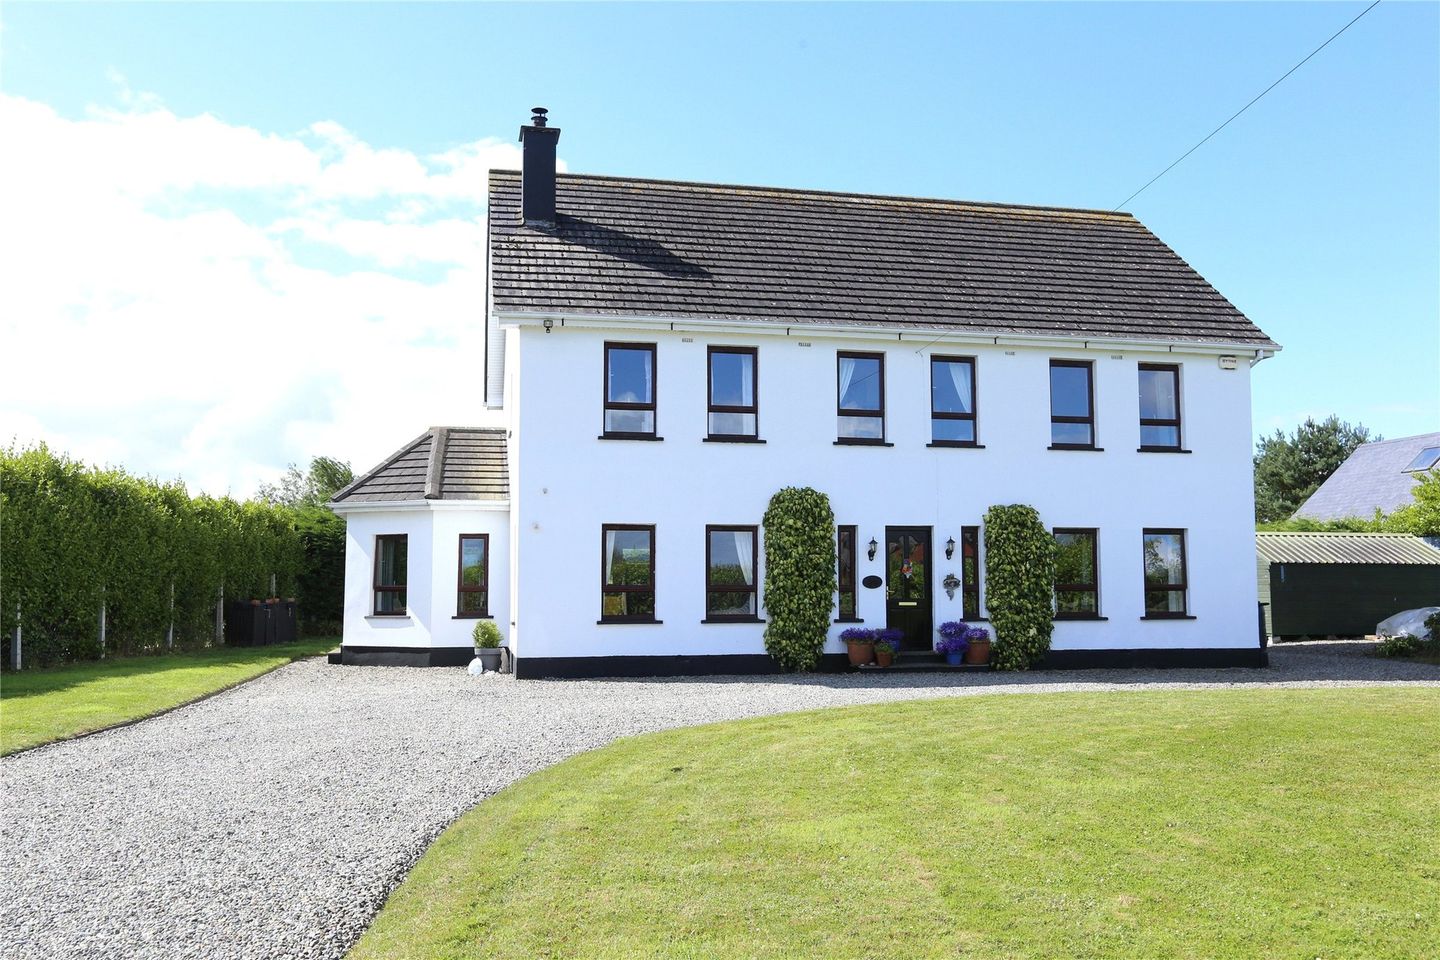 Wyanstown, Togher, Co. Louth